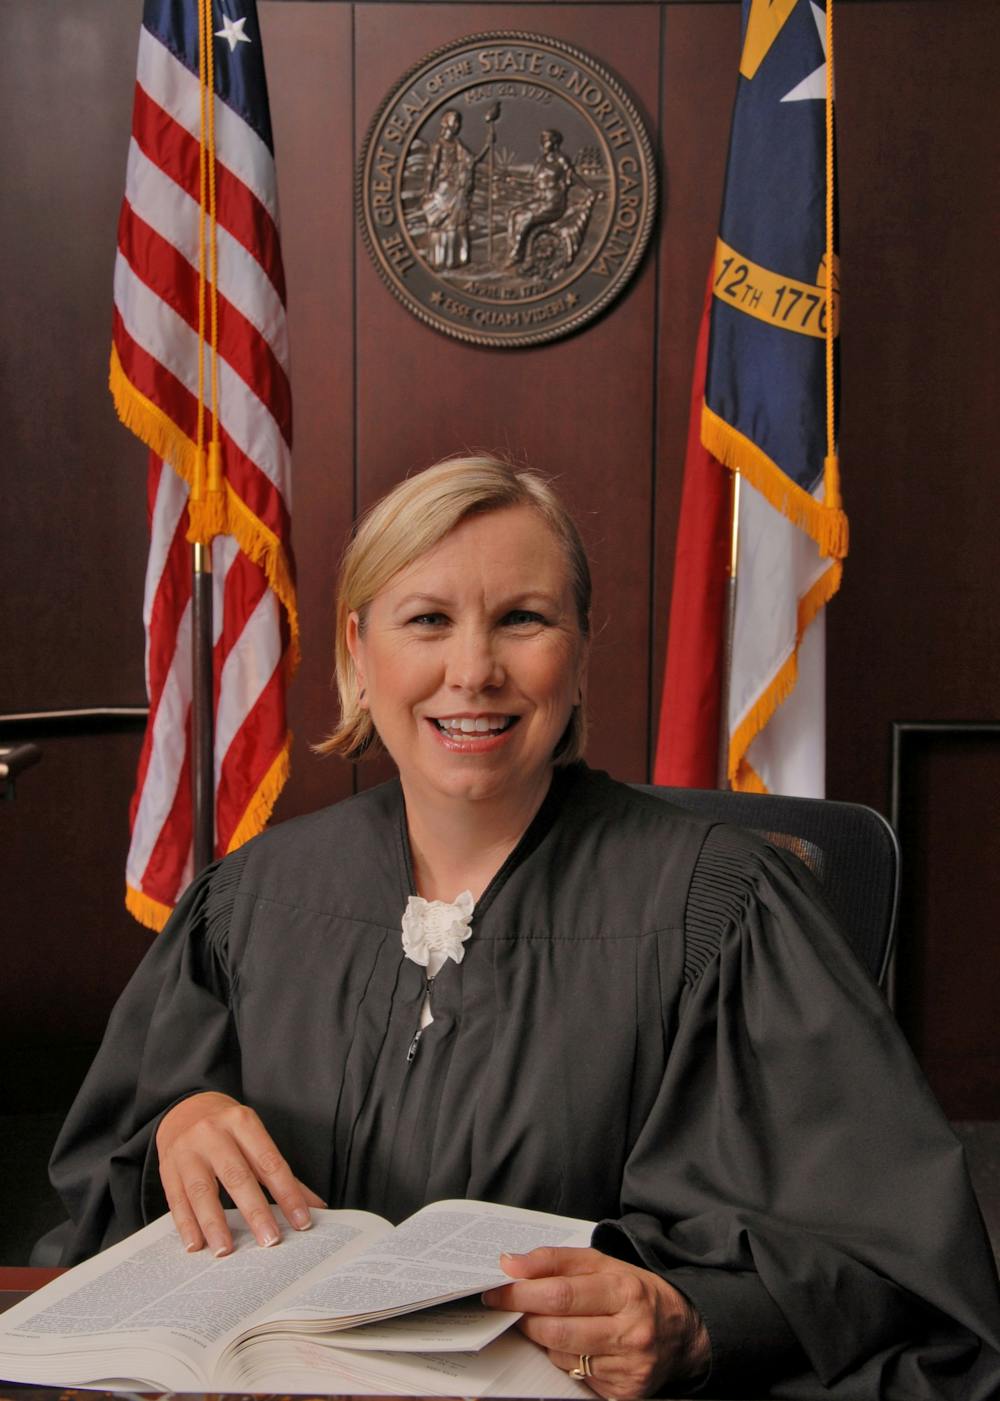 Judge Inman, who is currently on the N.C. Court of Appeals, is a candidate for the N.C. Supreme Court. Photo courtesy of the North Carolina Judicial Branch Communications Office.